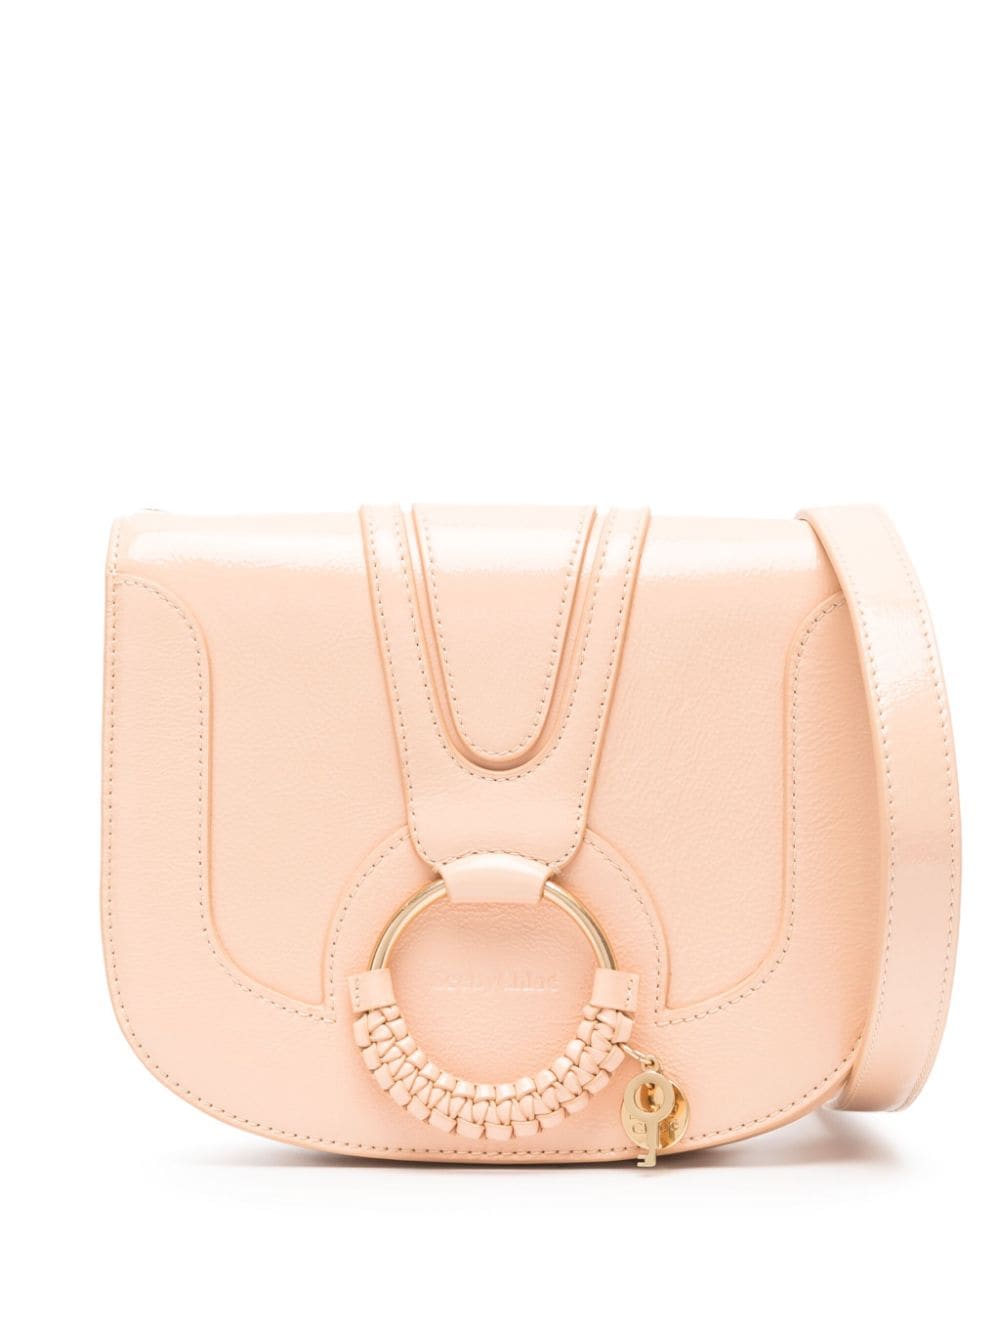 See by Chloé Hana Schultertasche - Nude von See by Chloé